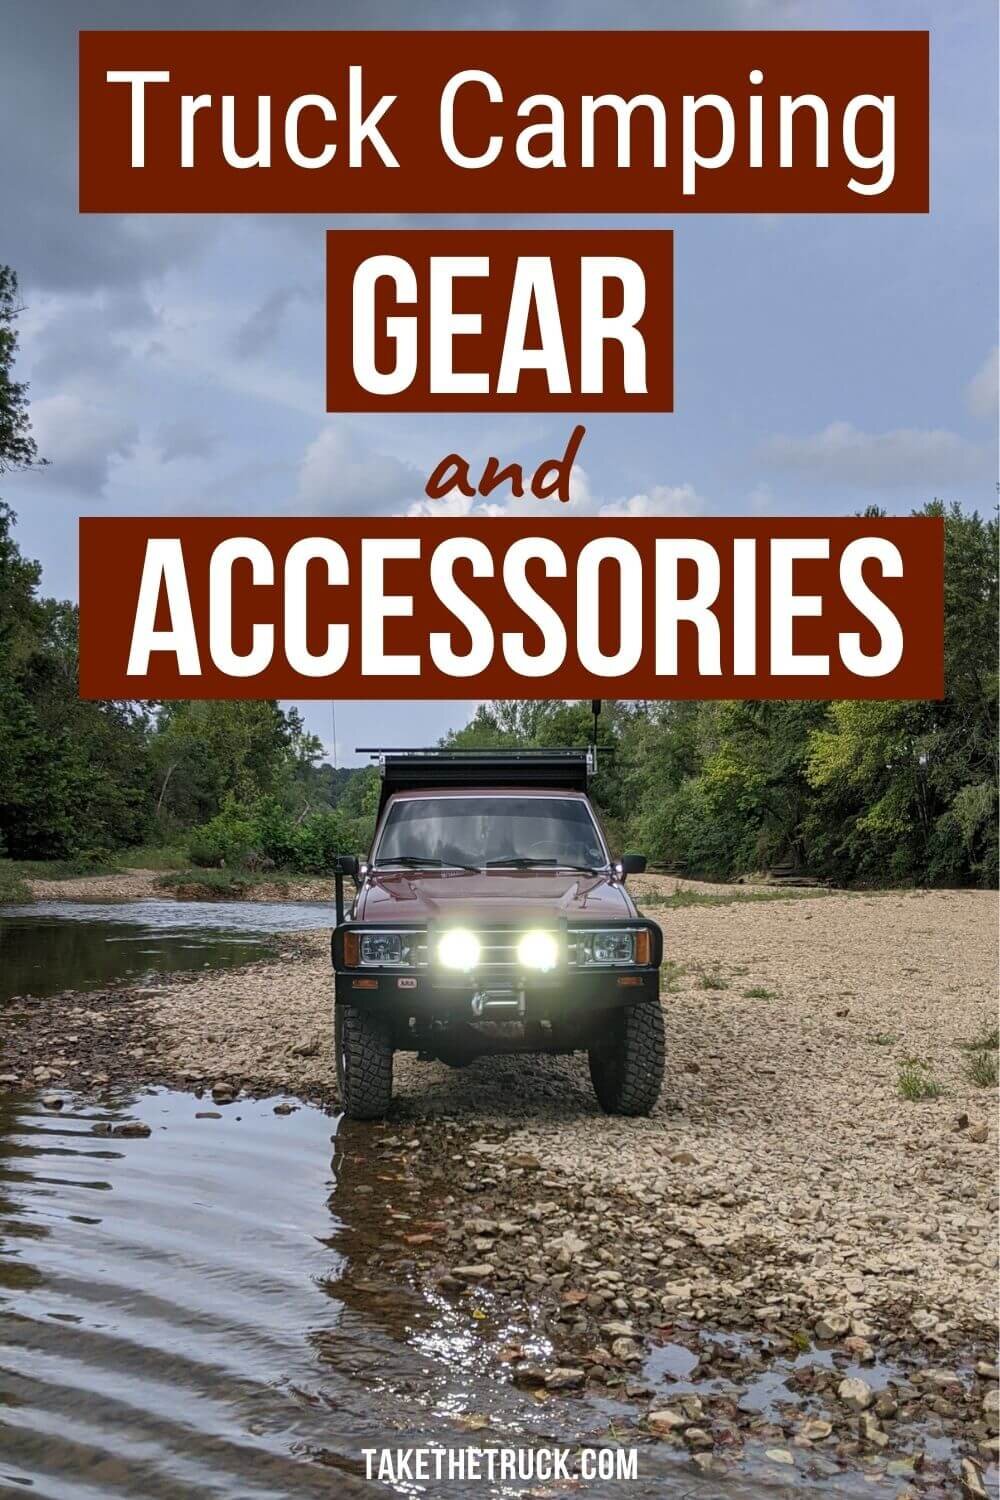 Truck Camping Gear and Accessories | Take The Truck